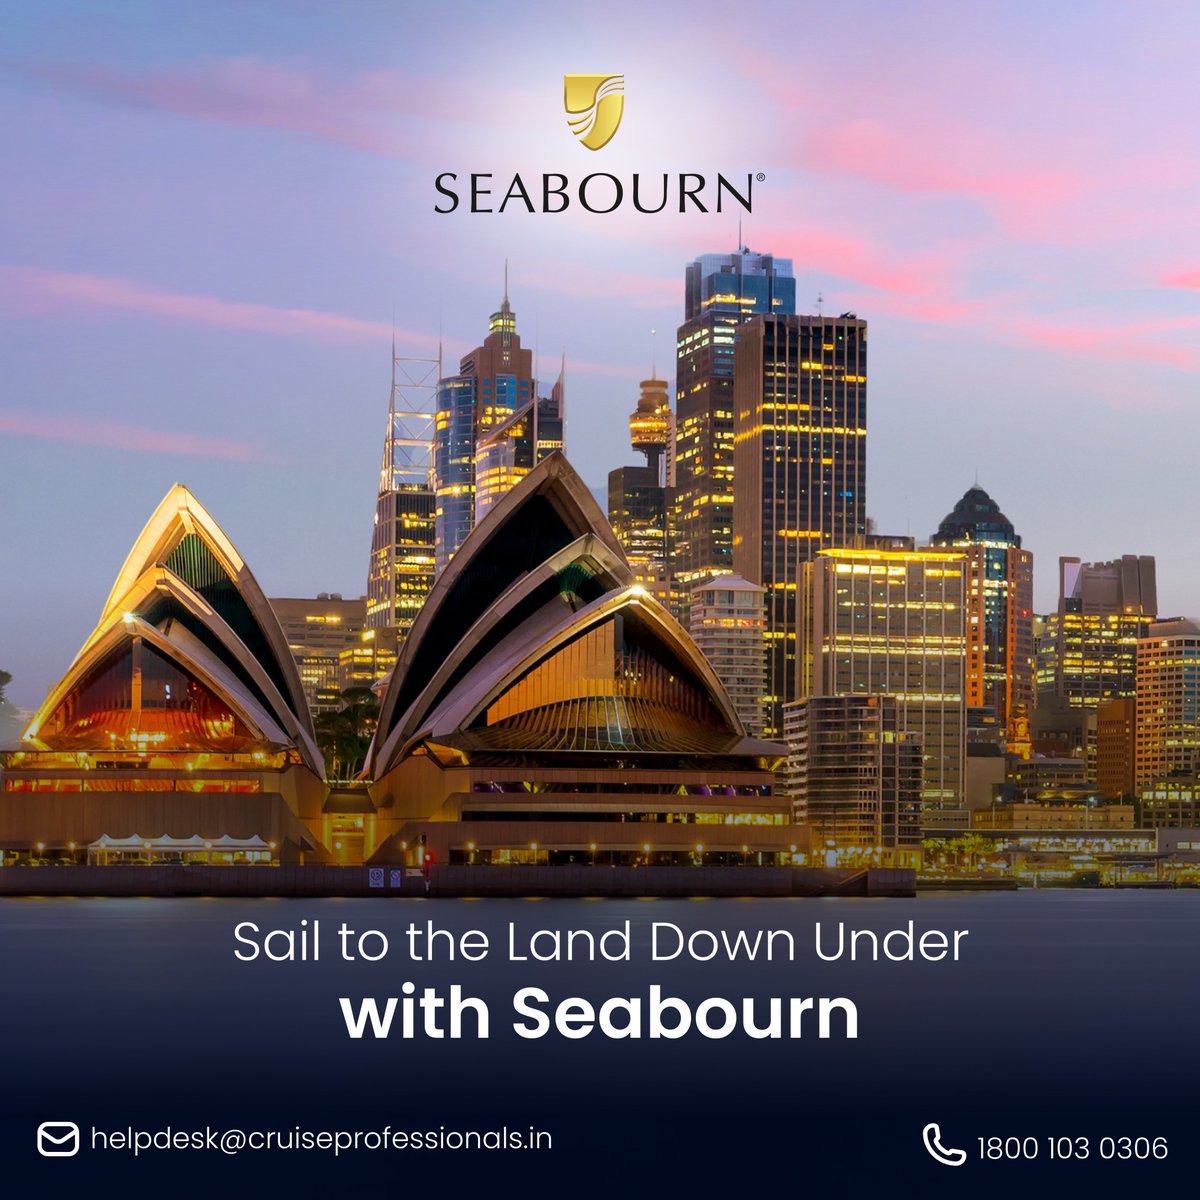 Sail with Seabourn to the Land Down Under - Explore Australia.

#seabourn #cruiseprofessionals #australia #cruise #landdownunder #cruiselife #seasthemoment #seabournmoments